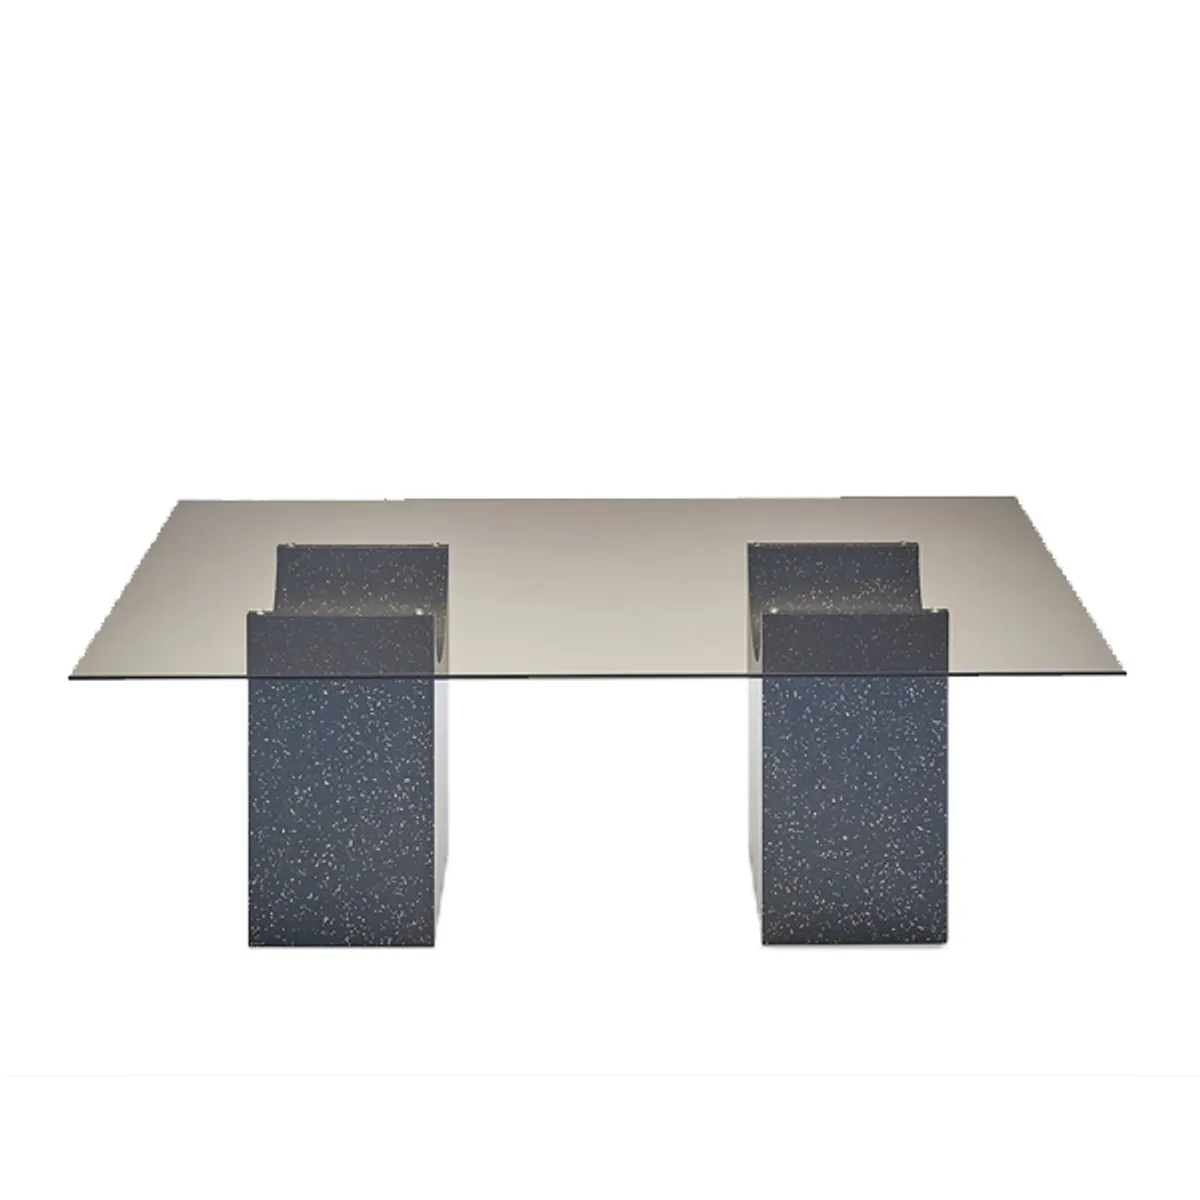 Vestige square dining table Inside Out Contracts2